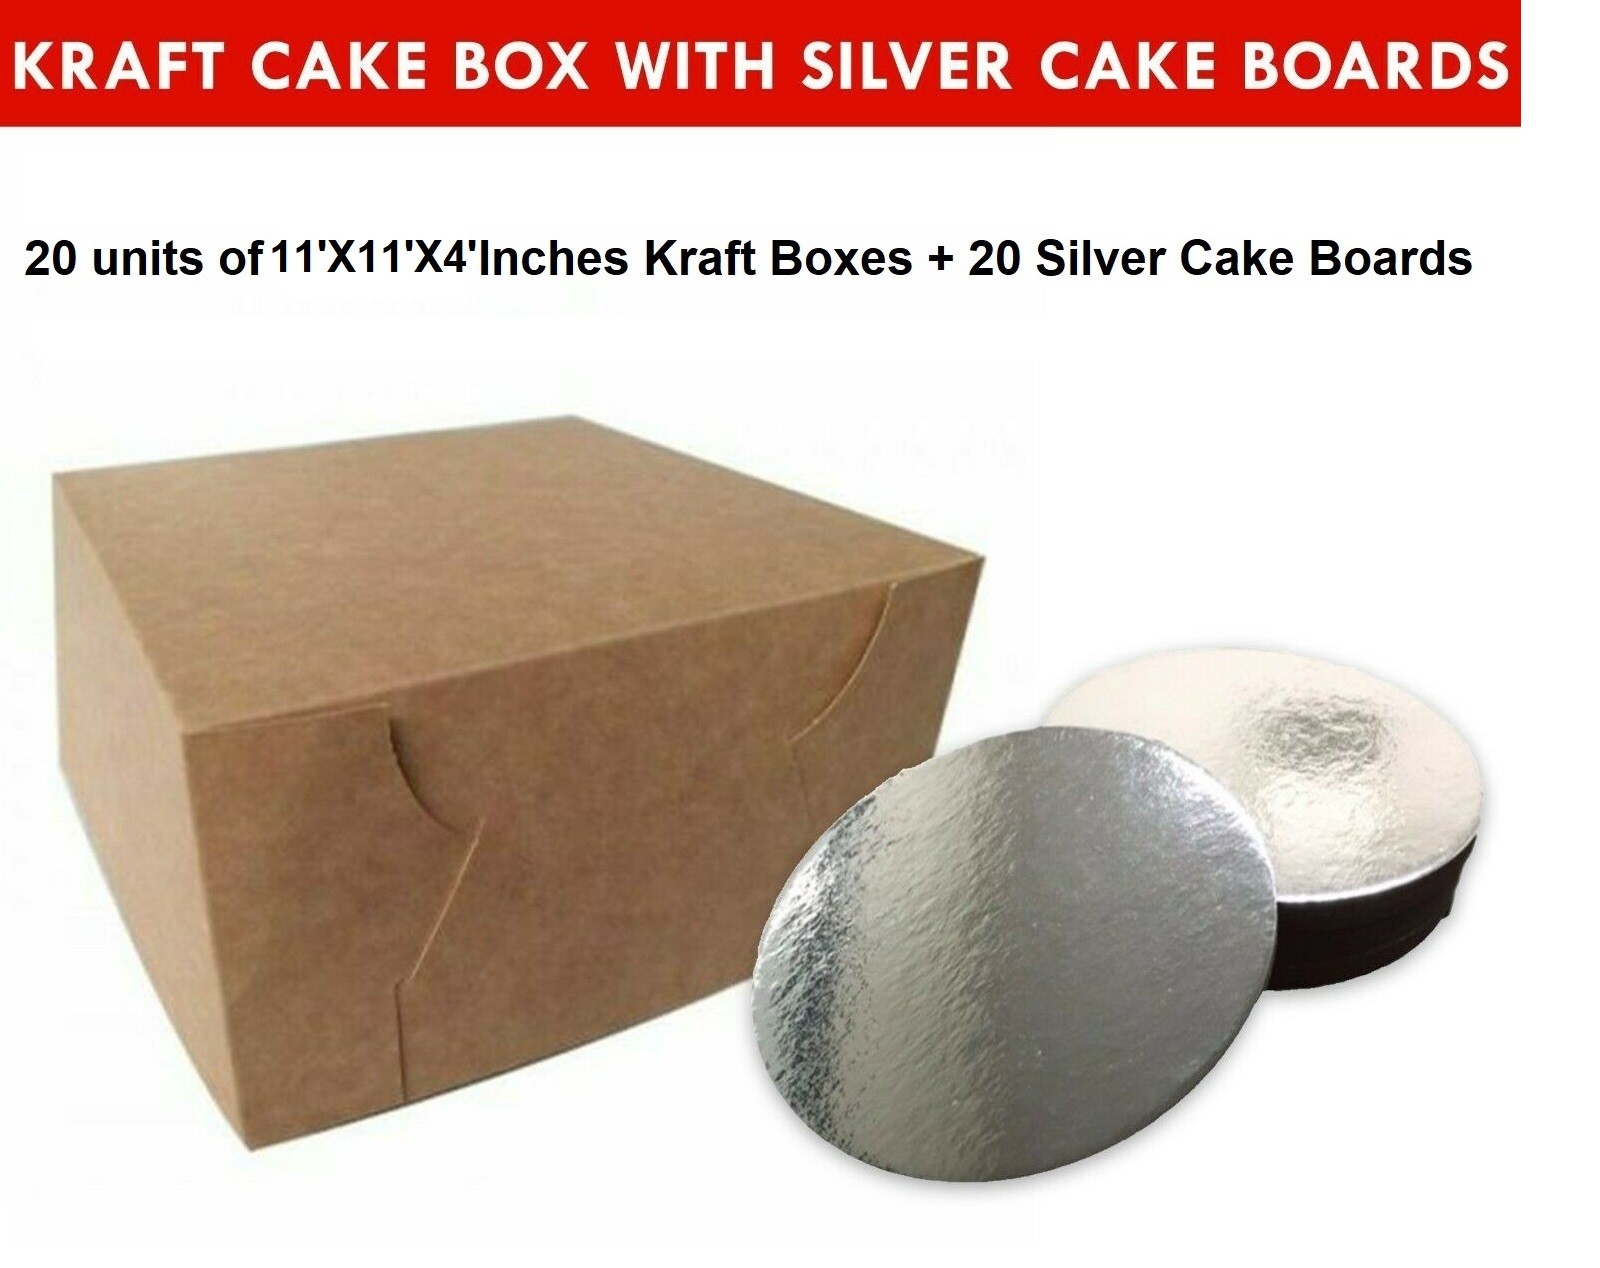 Kraft Cake Boxes with Round boards - 11" x 11" x 4" ($3.9 /pc x 20 units)